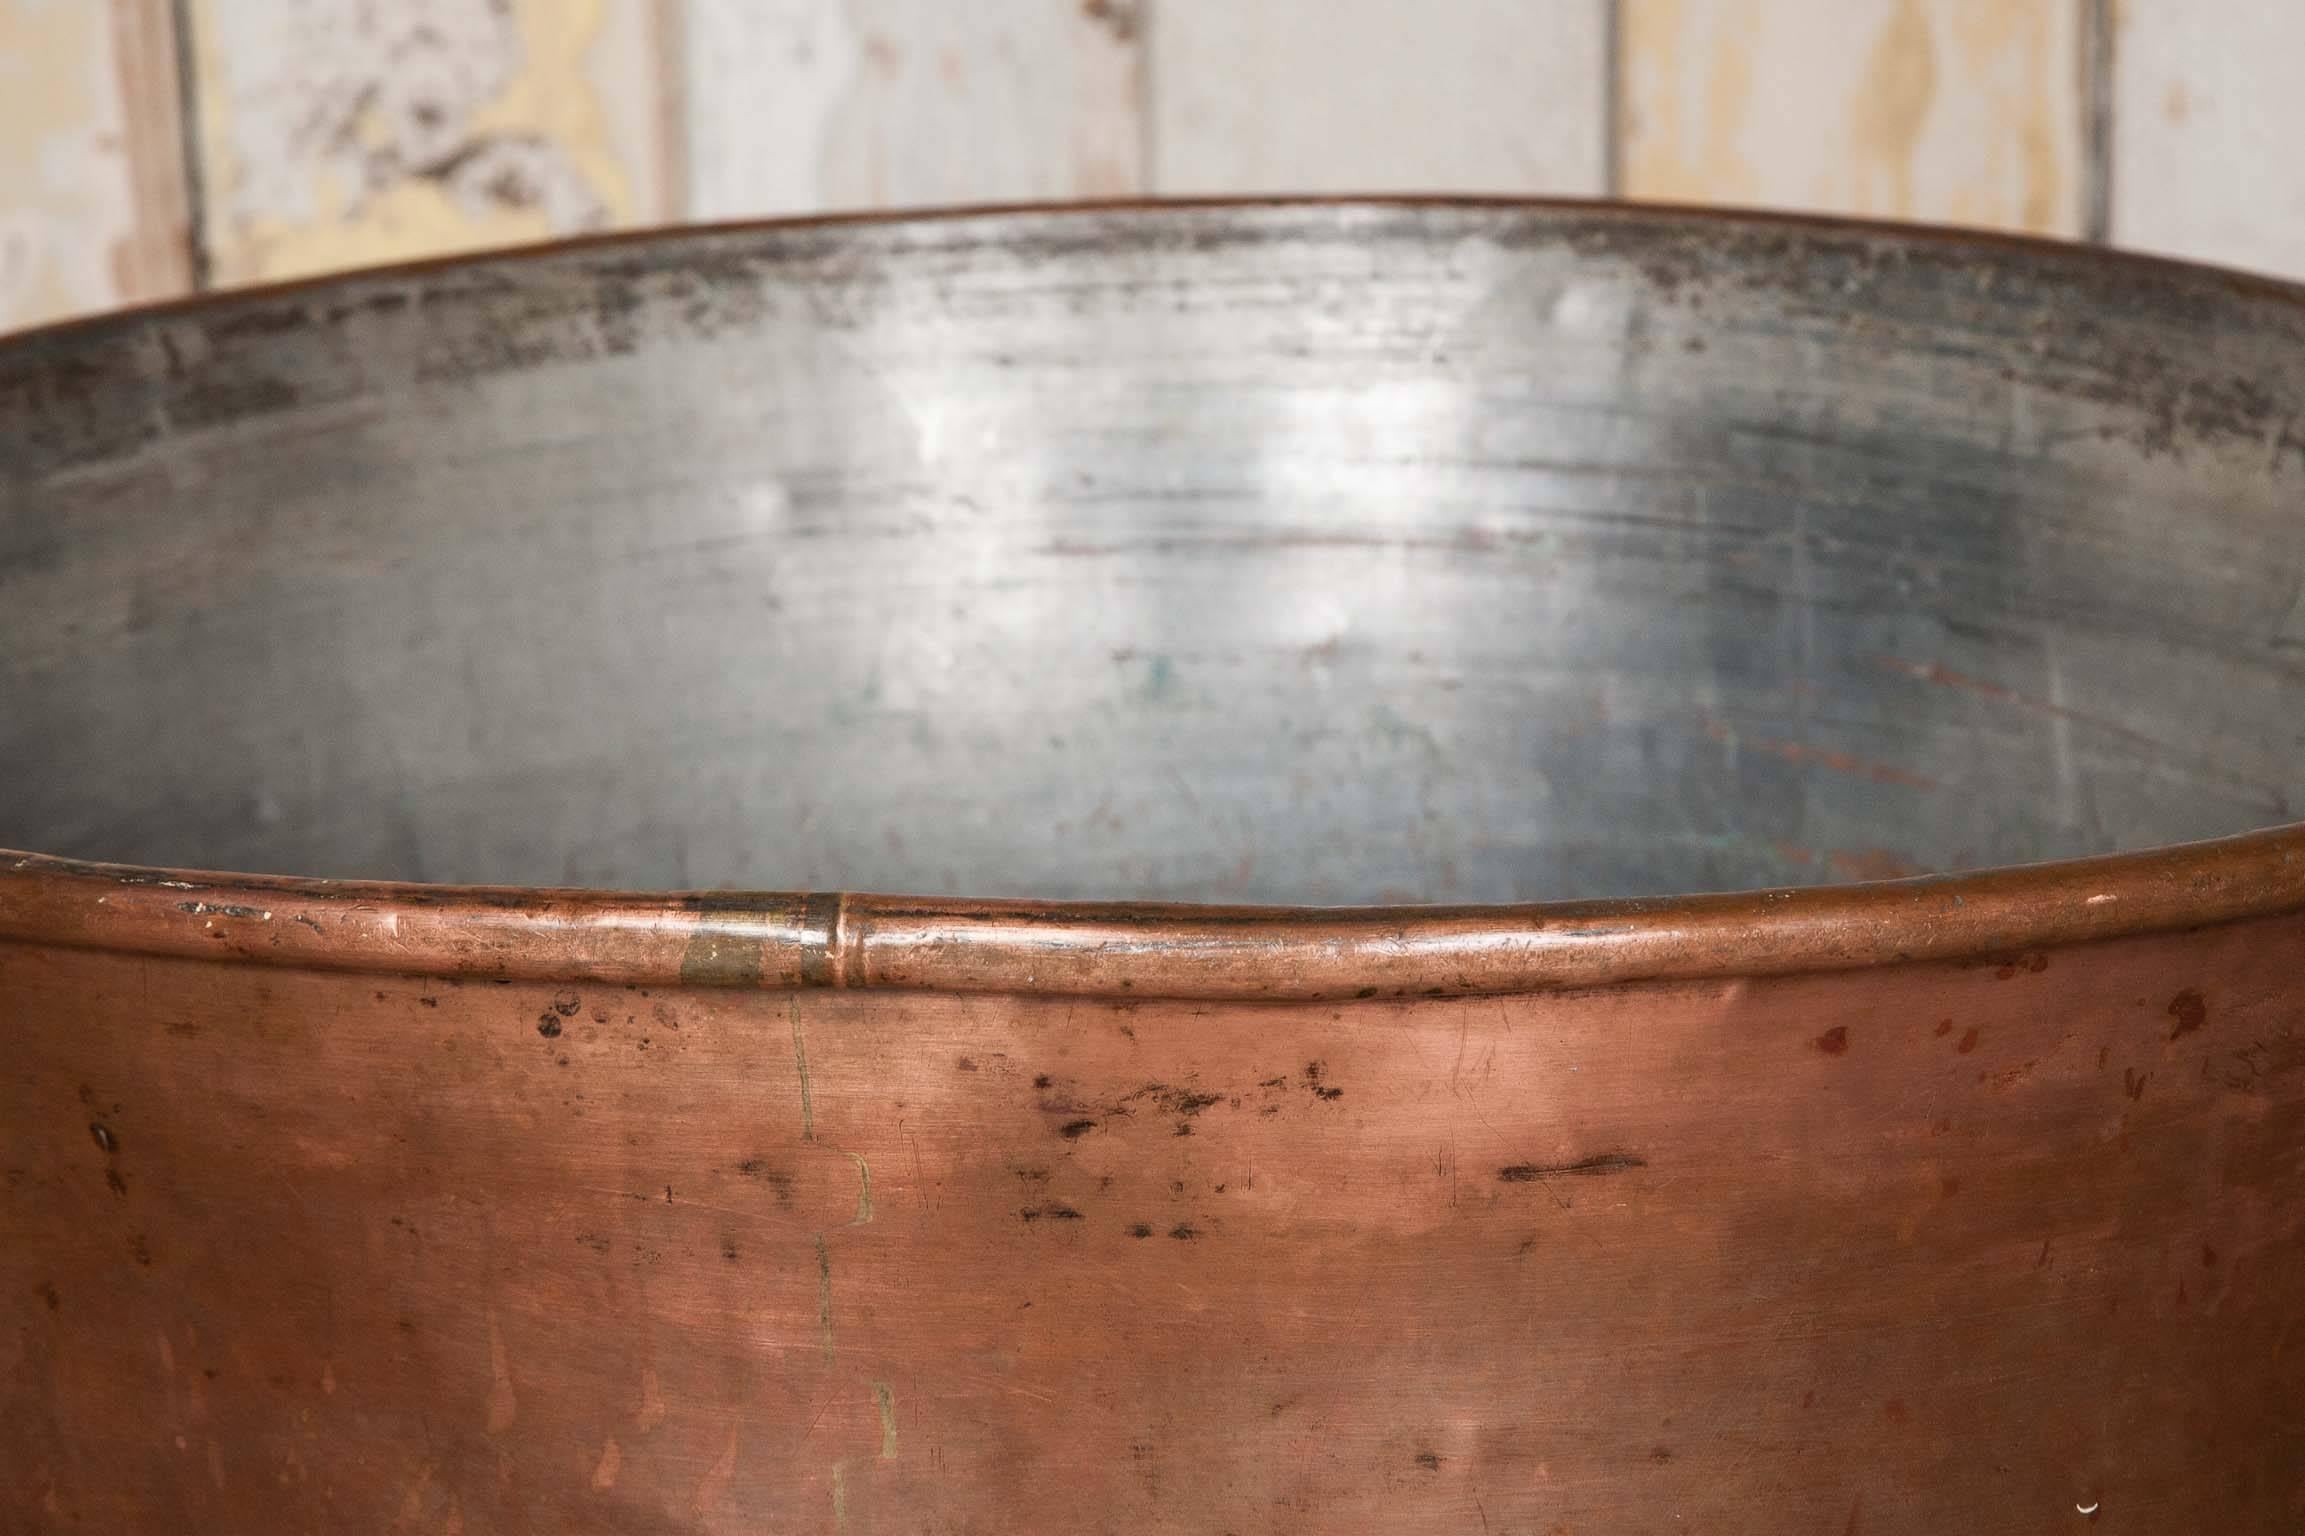 An antique polished copper cooking pot. This large pot would have been created through beating thick sheets of copper into shape. This pot has two solid copper handles attached to the piece and has been given a polished finish.